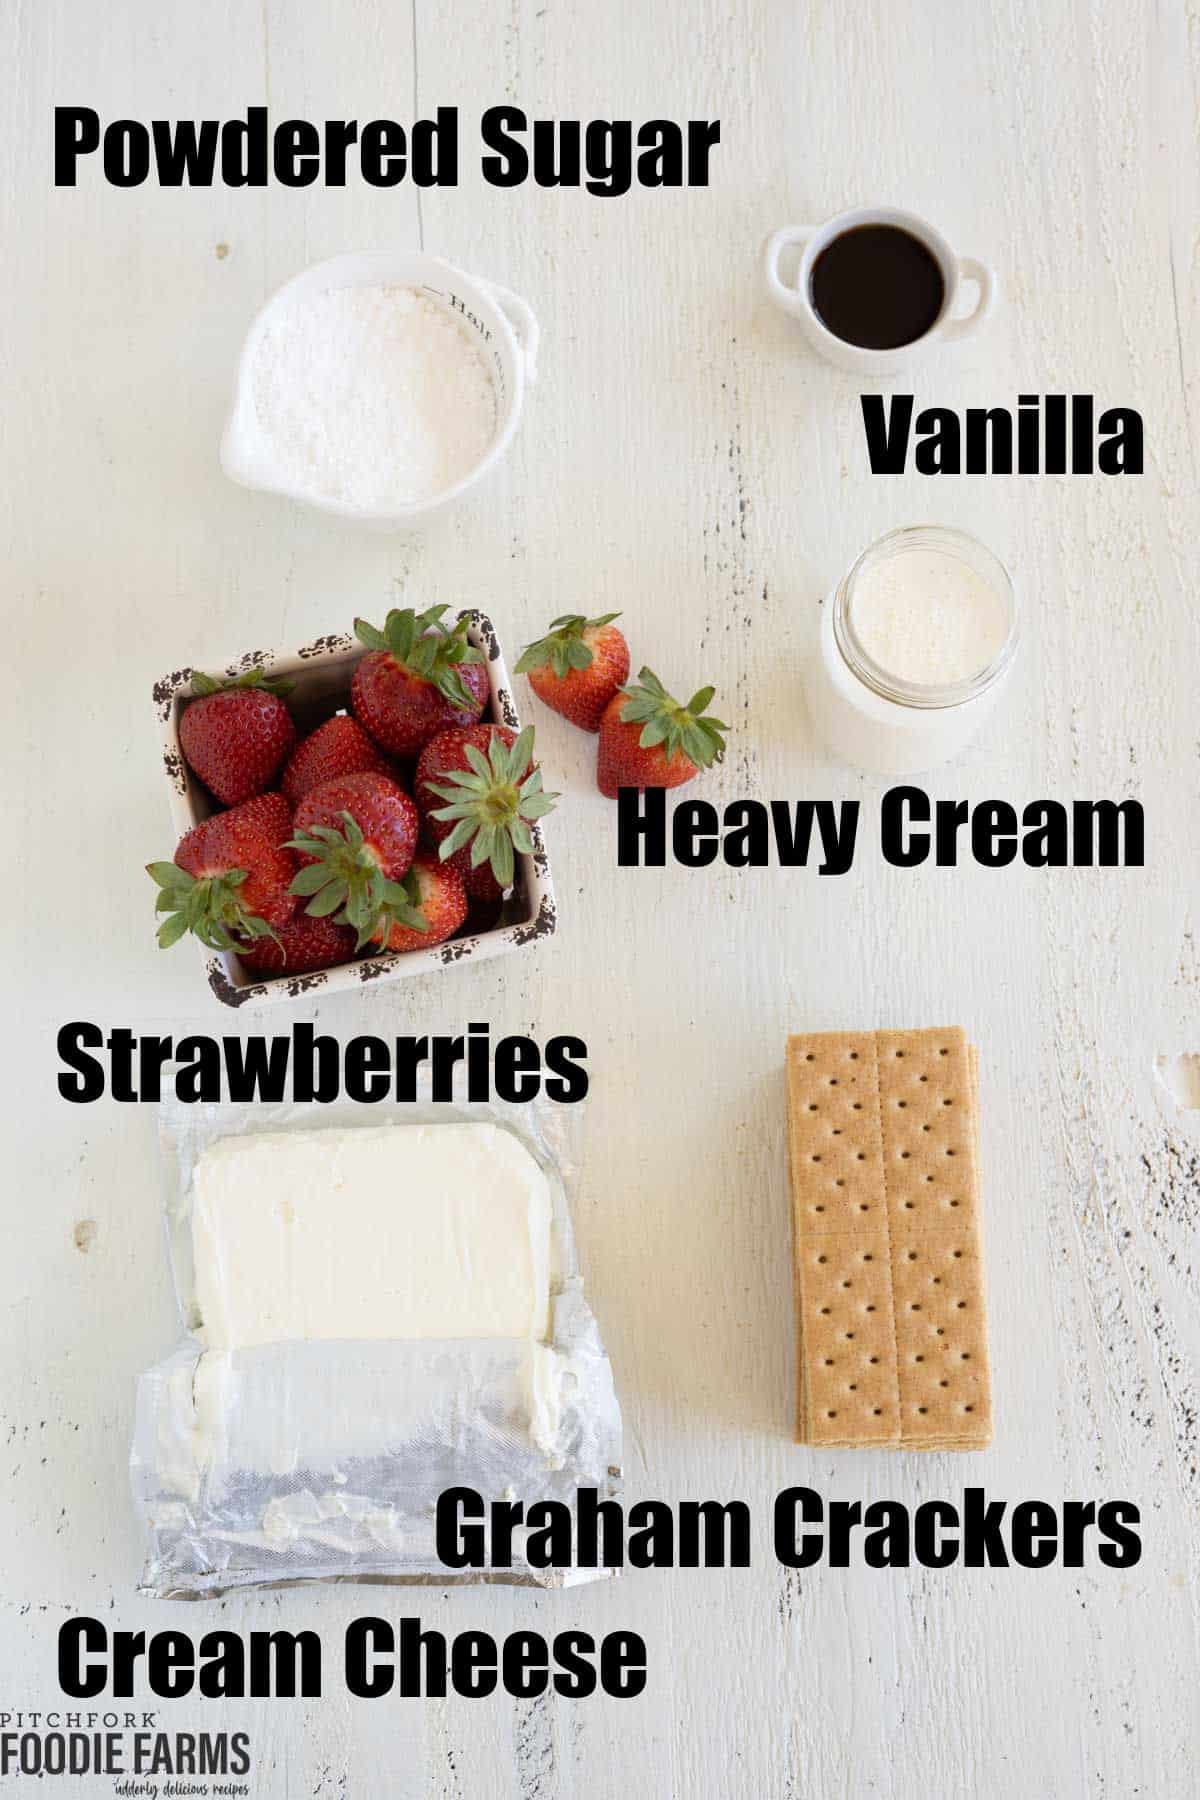 Image showing ingredients needed to make a no bake strawberry icebox cake.